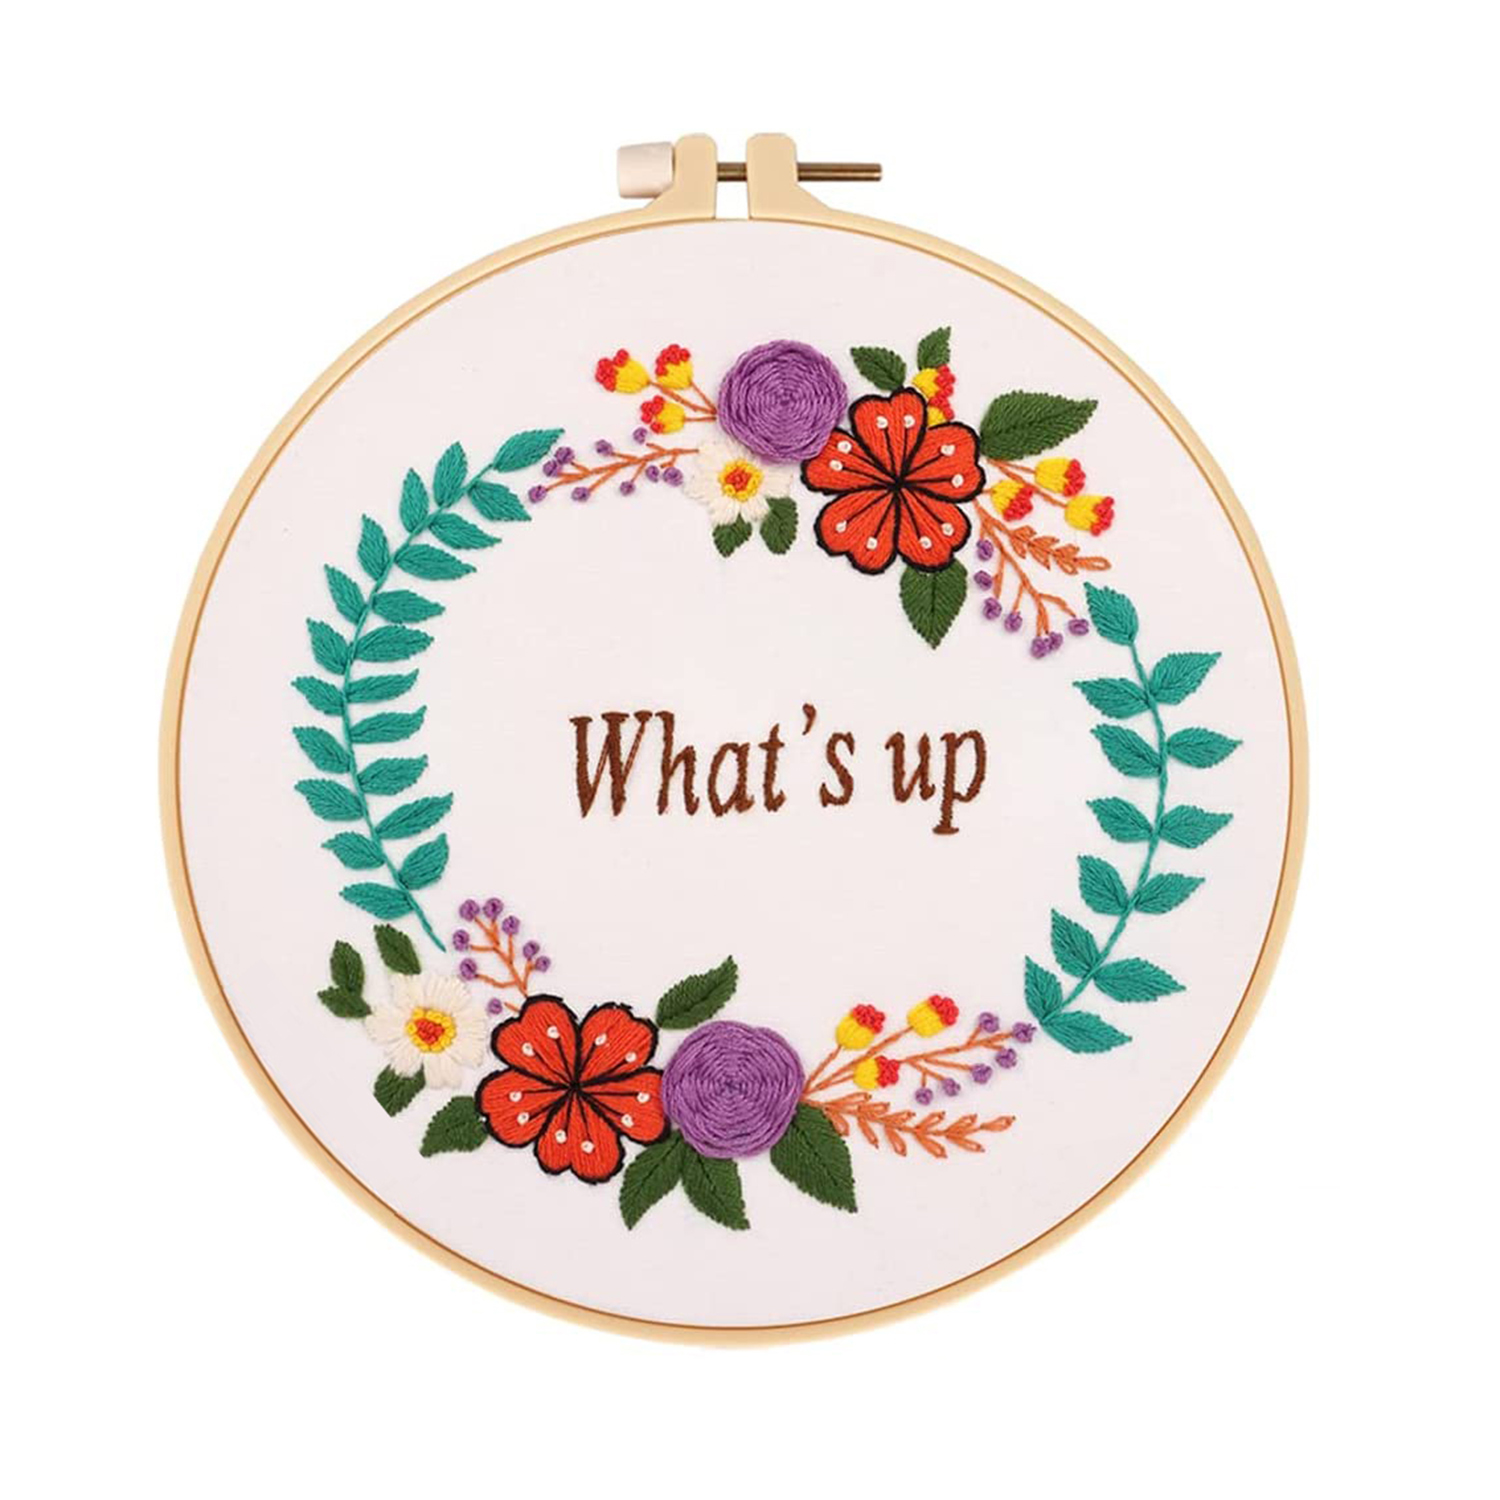 Embroidery Kit Cross stitch kits  for Adult Beginner - Wreath Words Pattern